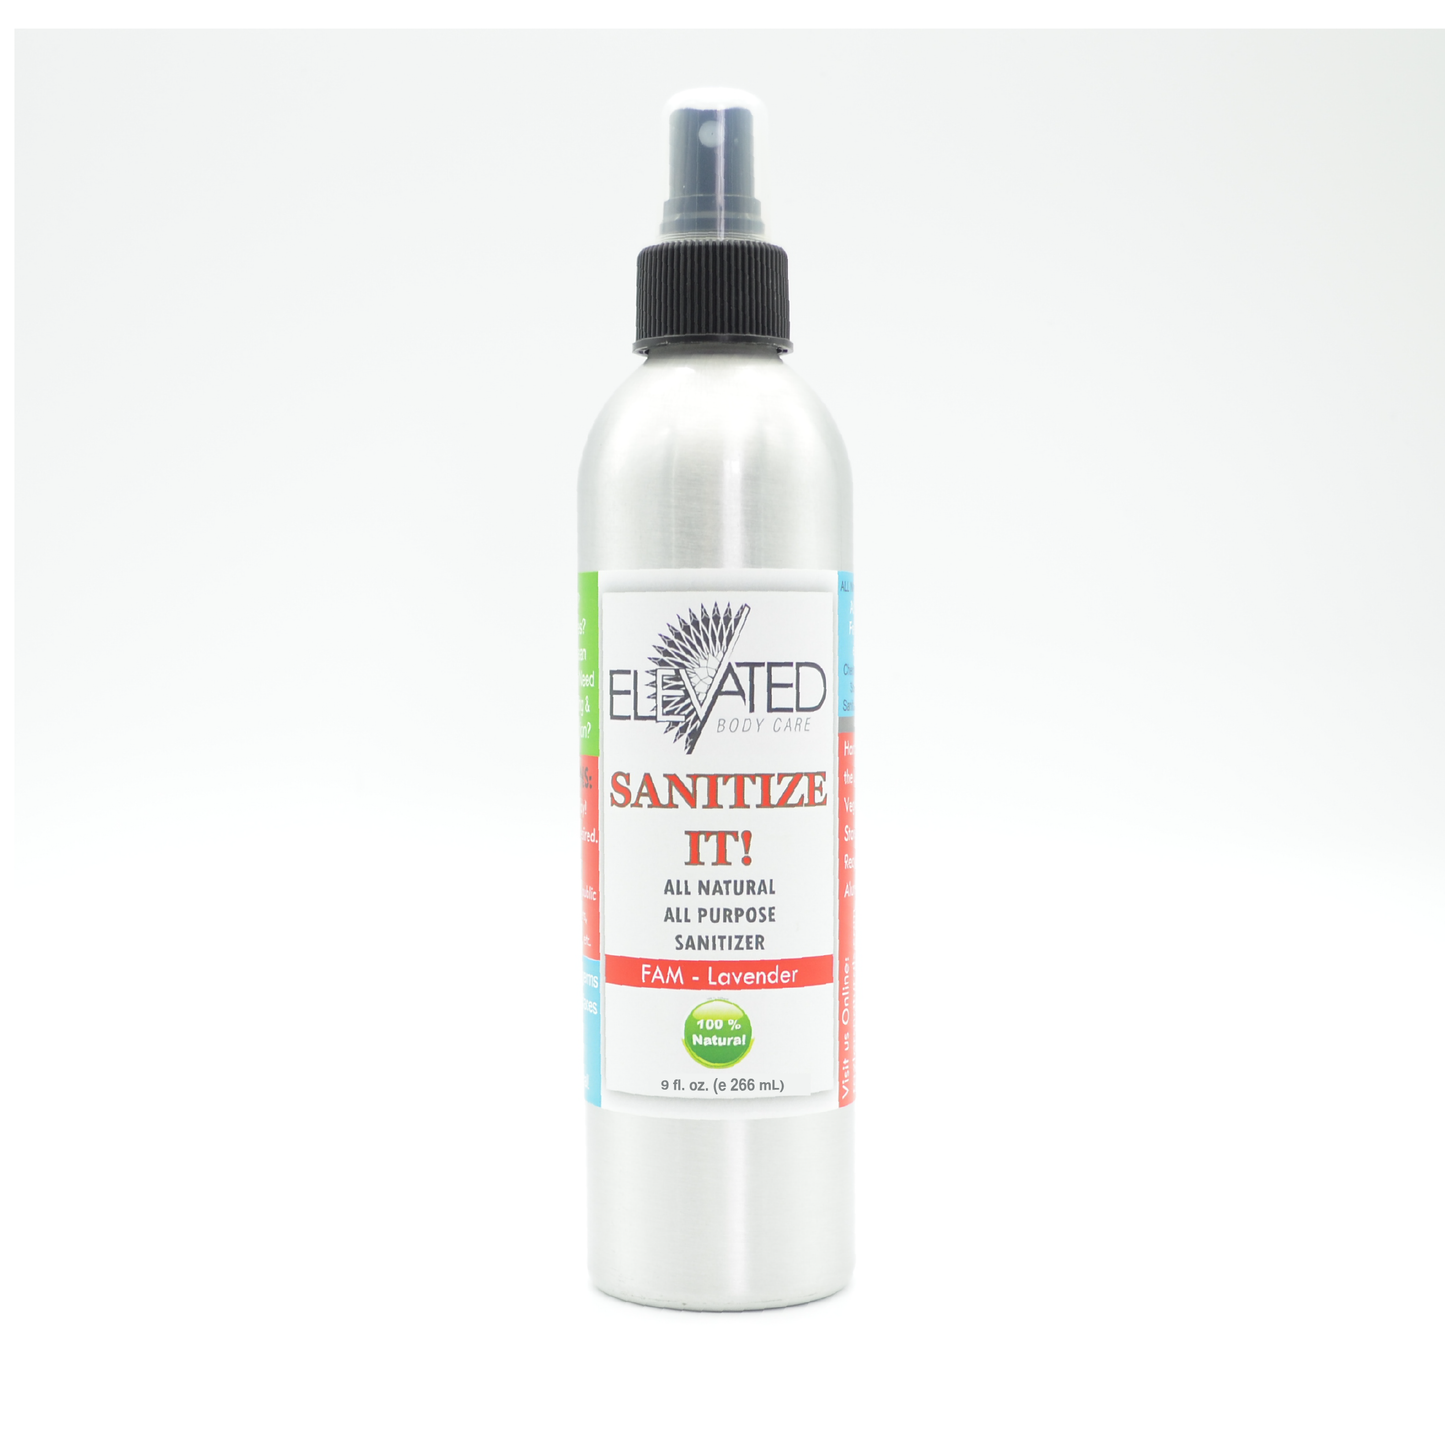 ELEVATED – SANITIZE IT! Natural Sanitizer – (2 sizes, 5 scents)